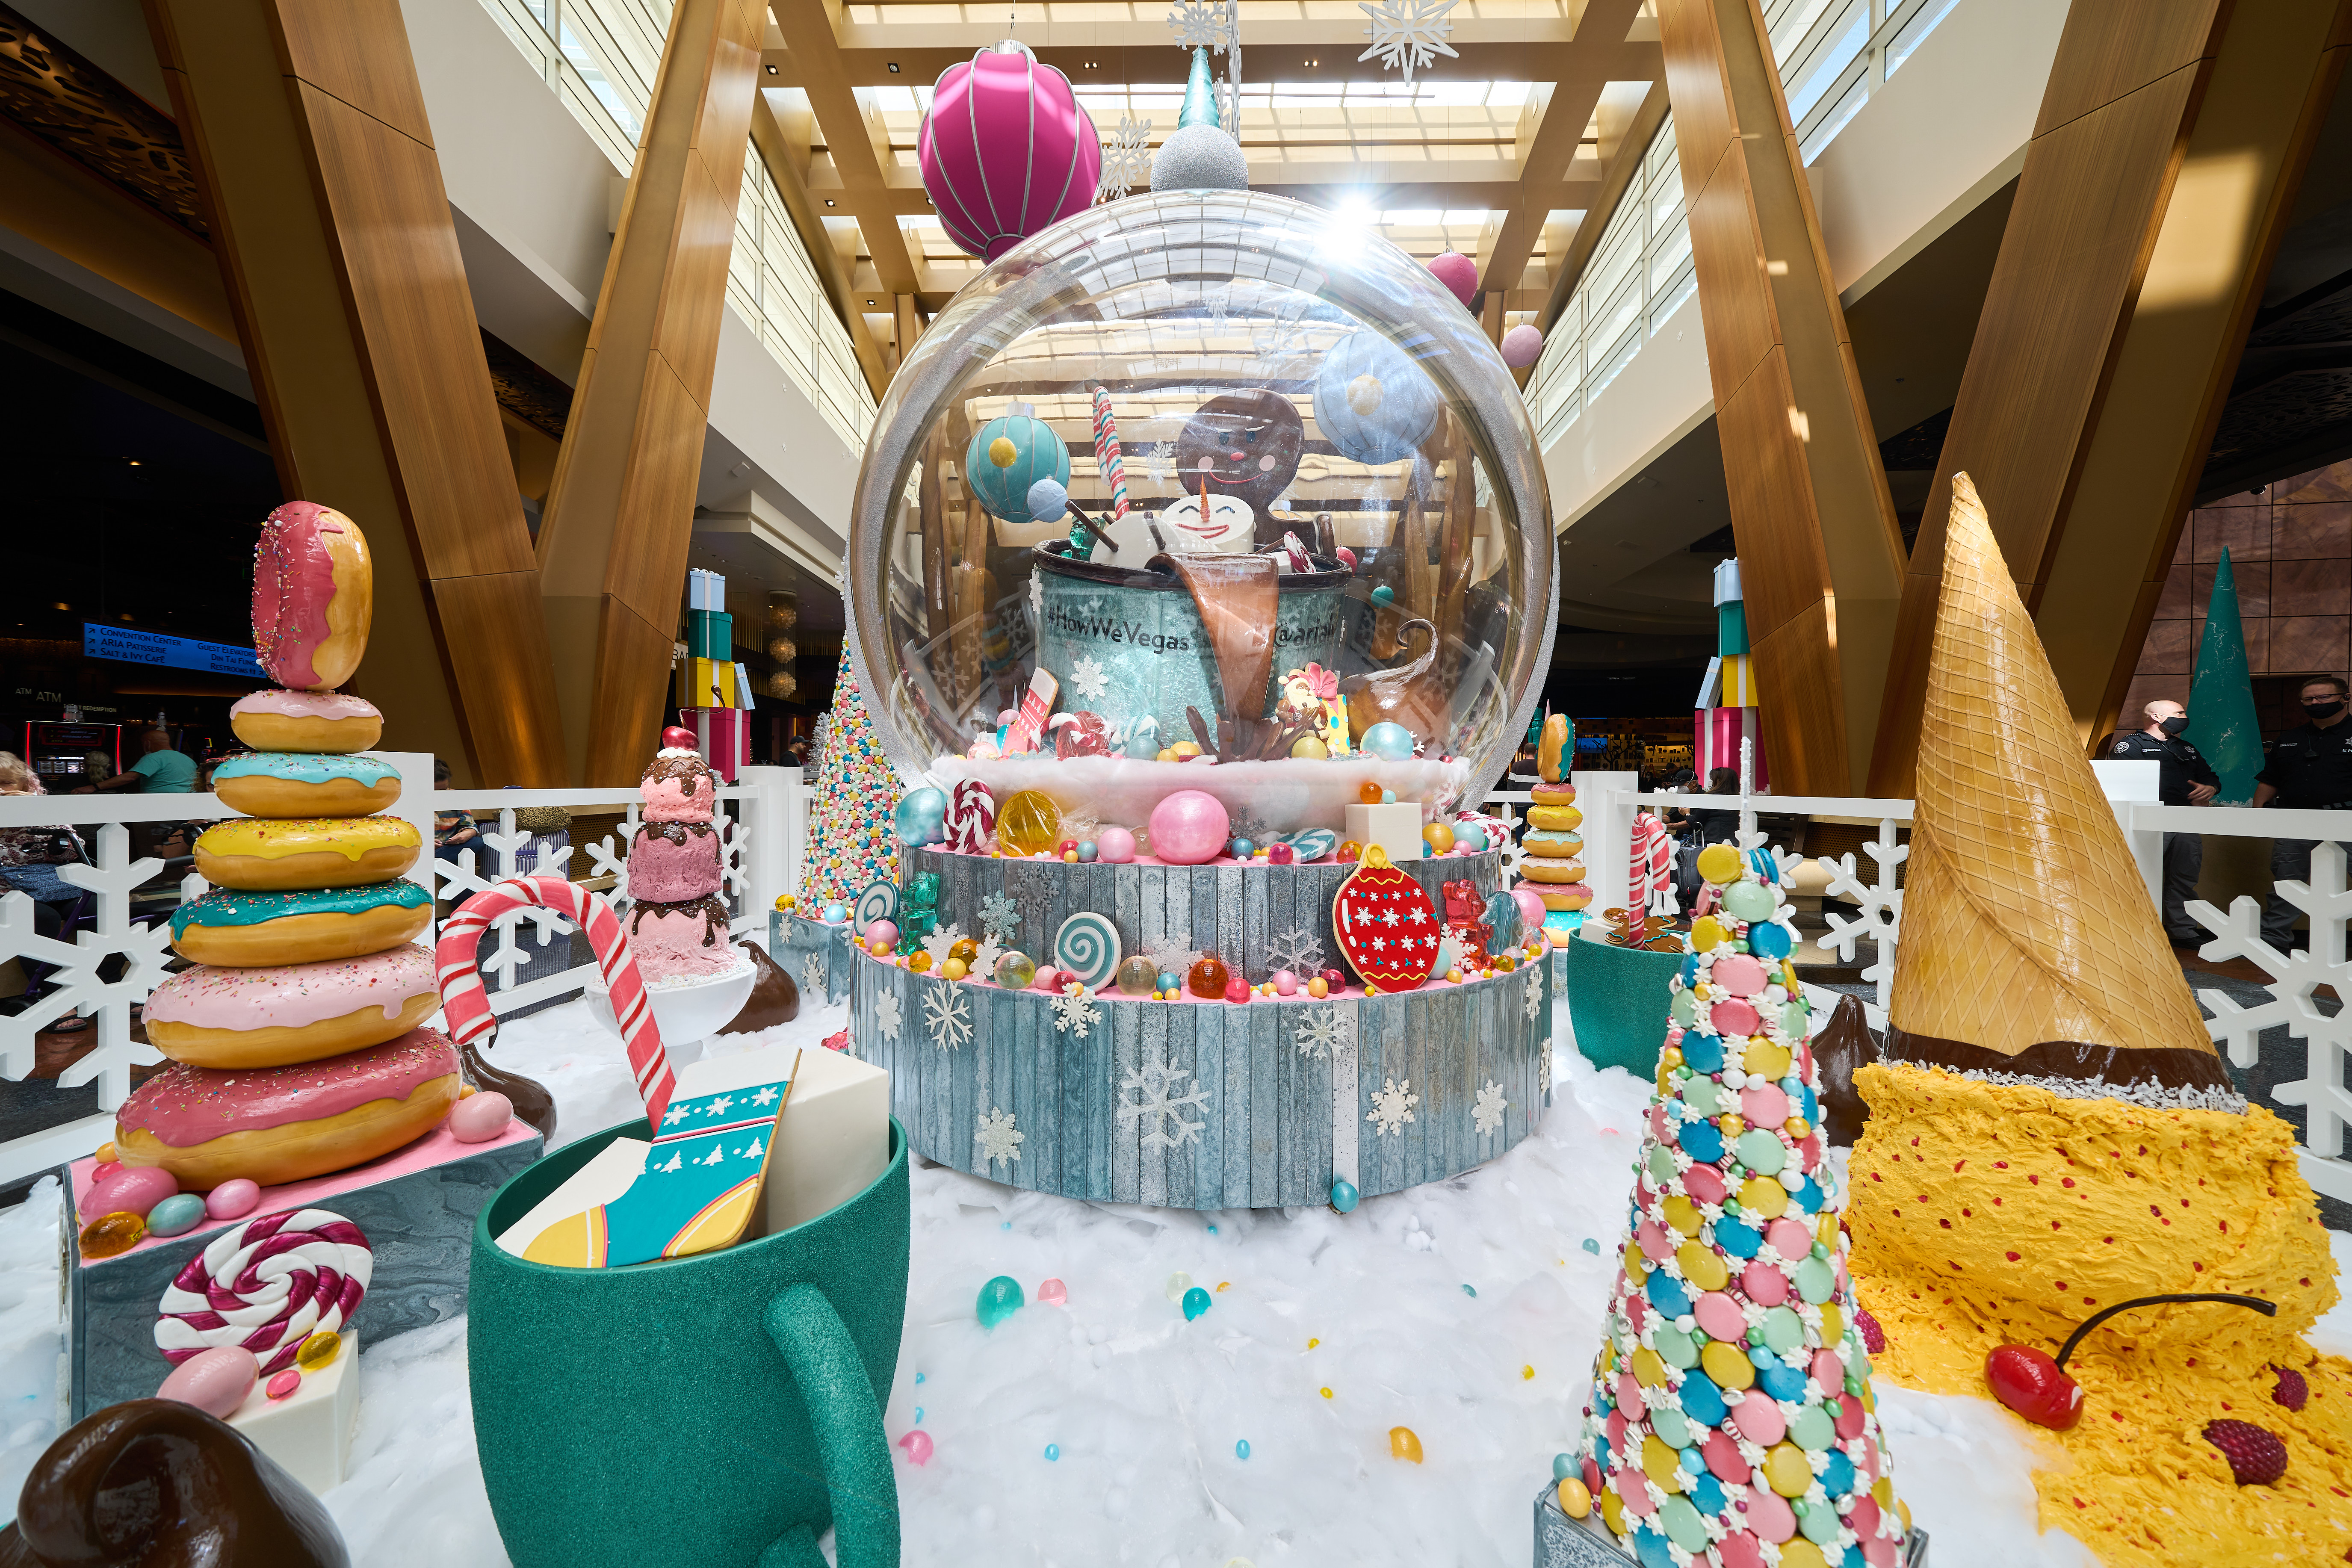 A holiday display with a giant snow globe.